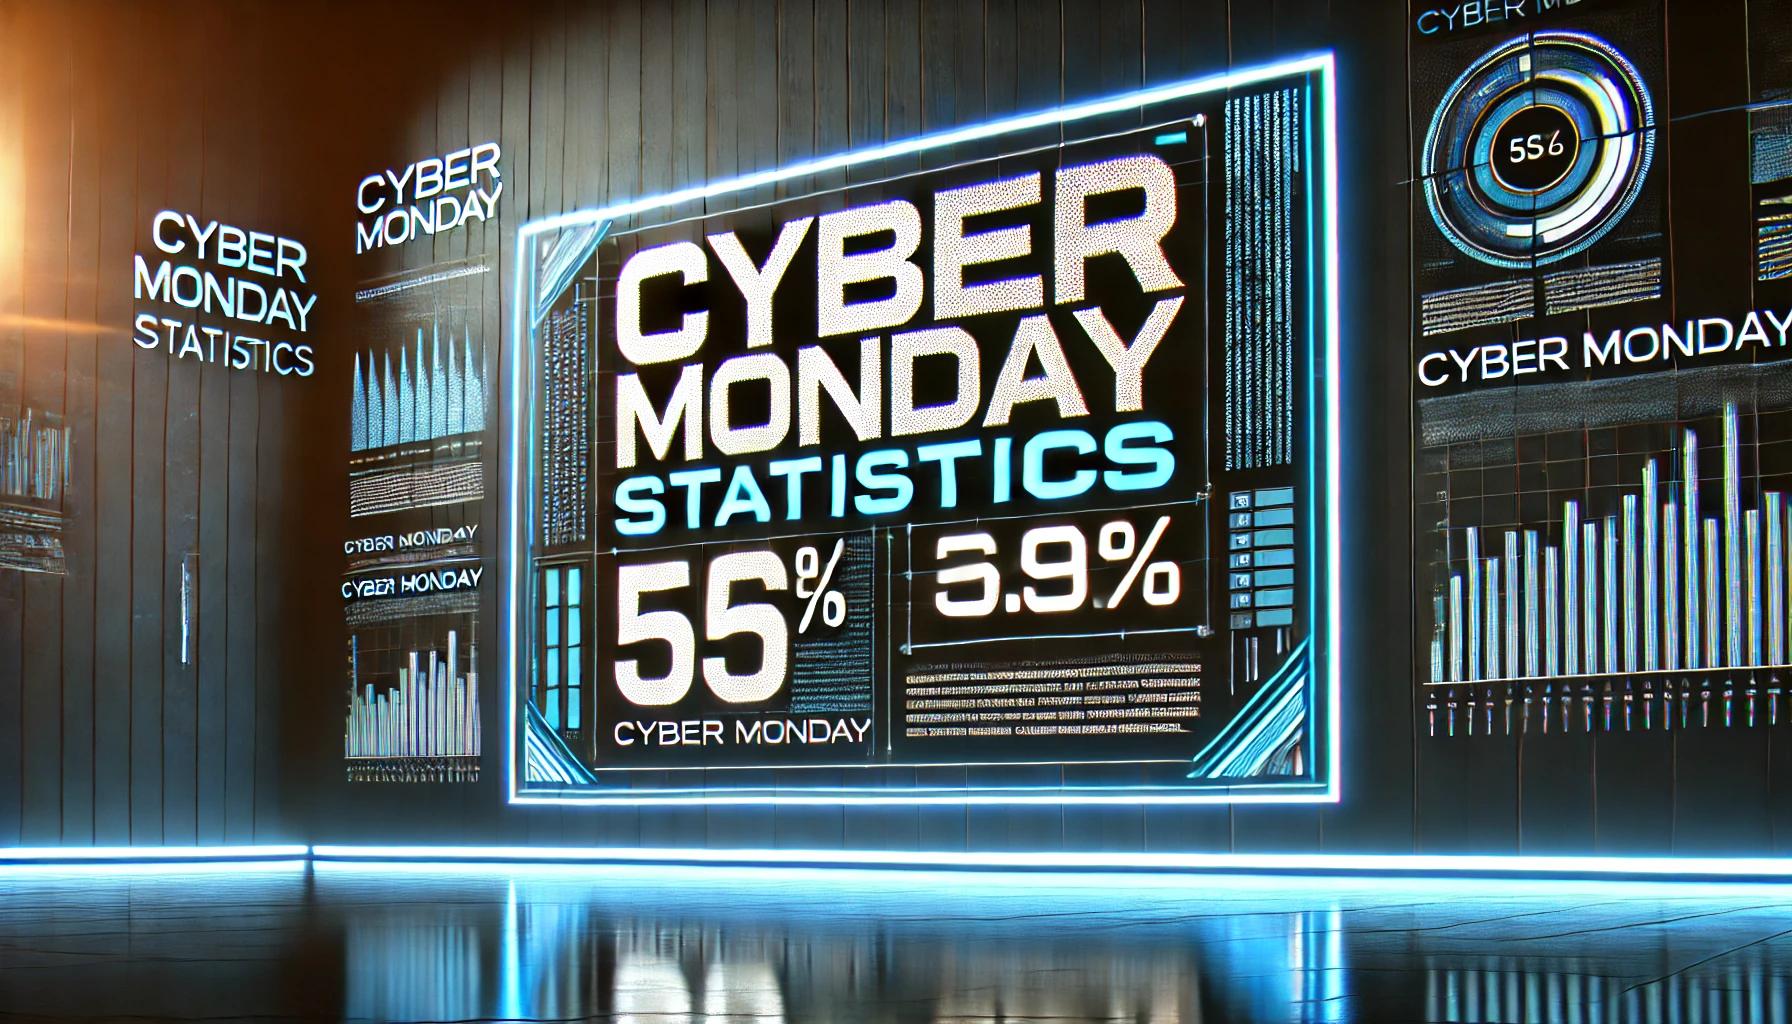 Cyber Monday Statistics By Product Categories, Age, Gender, Consumer Preferences, Consumer Behaviors and Retail Trends